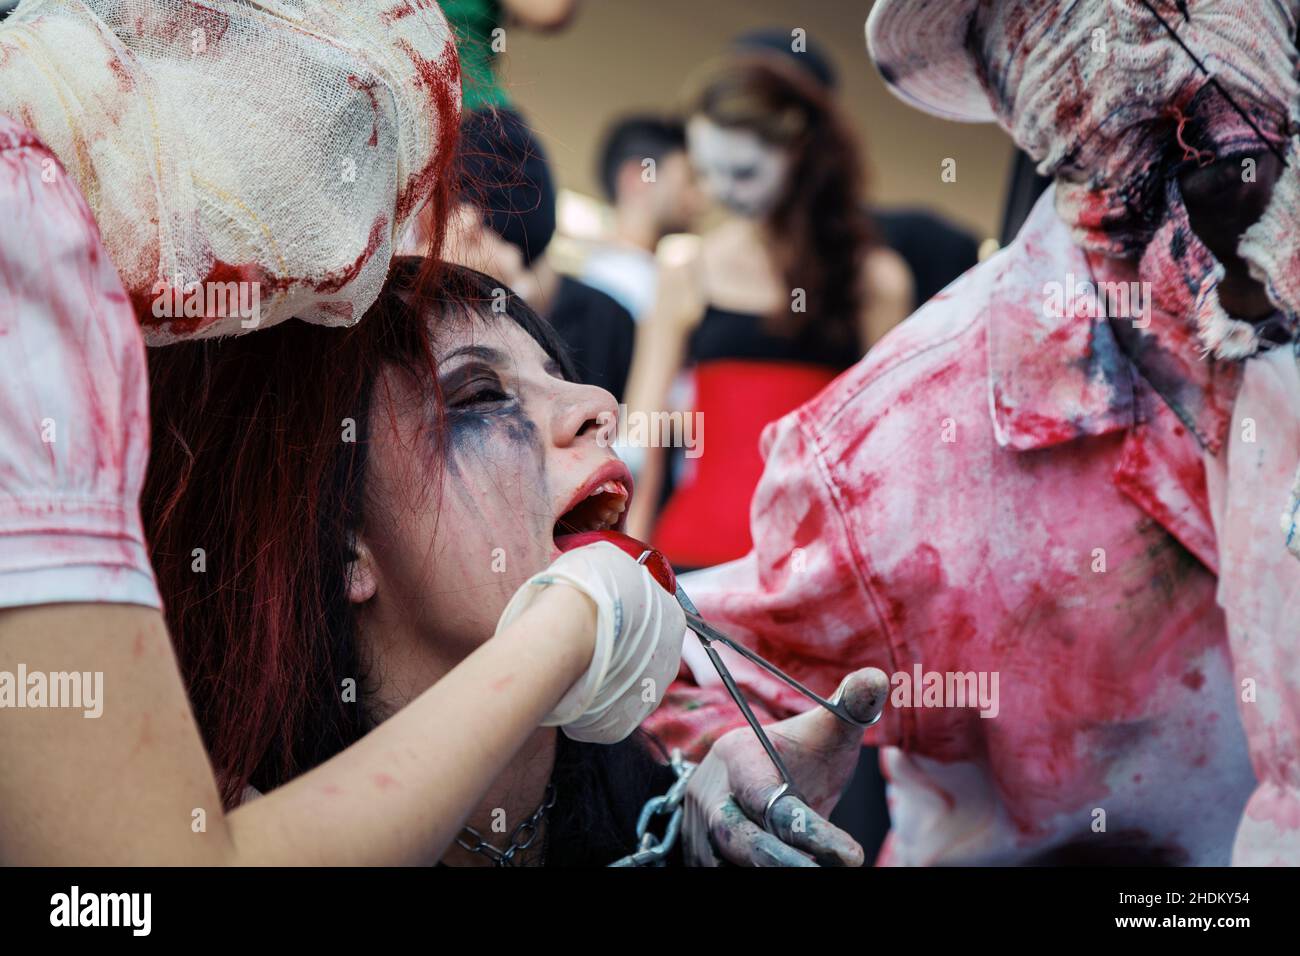 Sao Paulo, Brazil. 2nd November, 2013. People dressed up as zombies attend the annual Zombie Walk in Sao Paulo, Brazil. Stock Photo